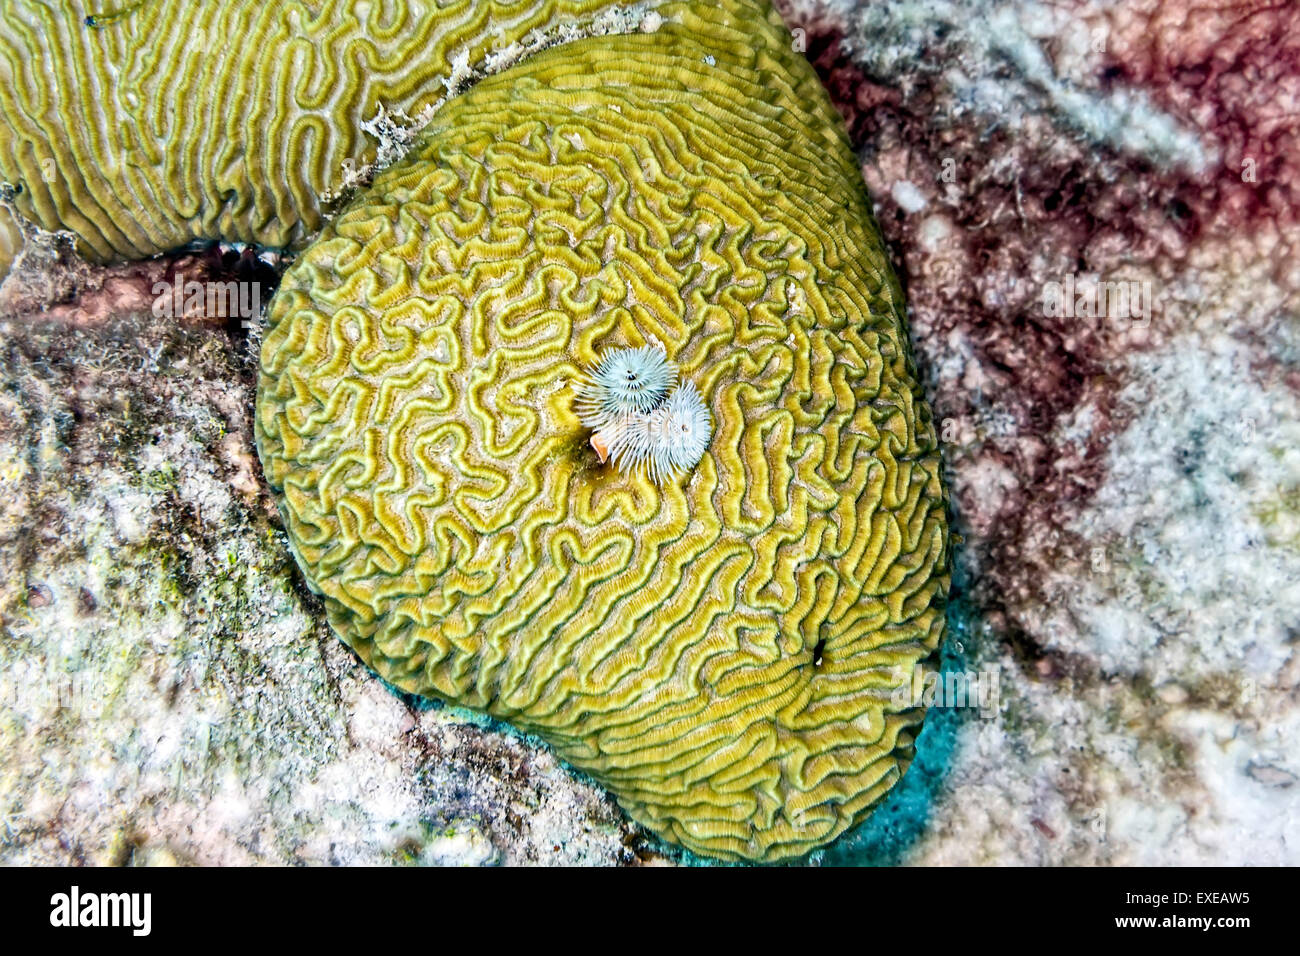 Christmas Tree Worm on Grooved Brain Coral at Sharon's Serenity in Klein Bonaire, Bonaire Stock Photo